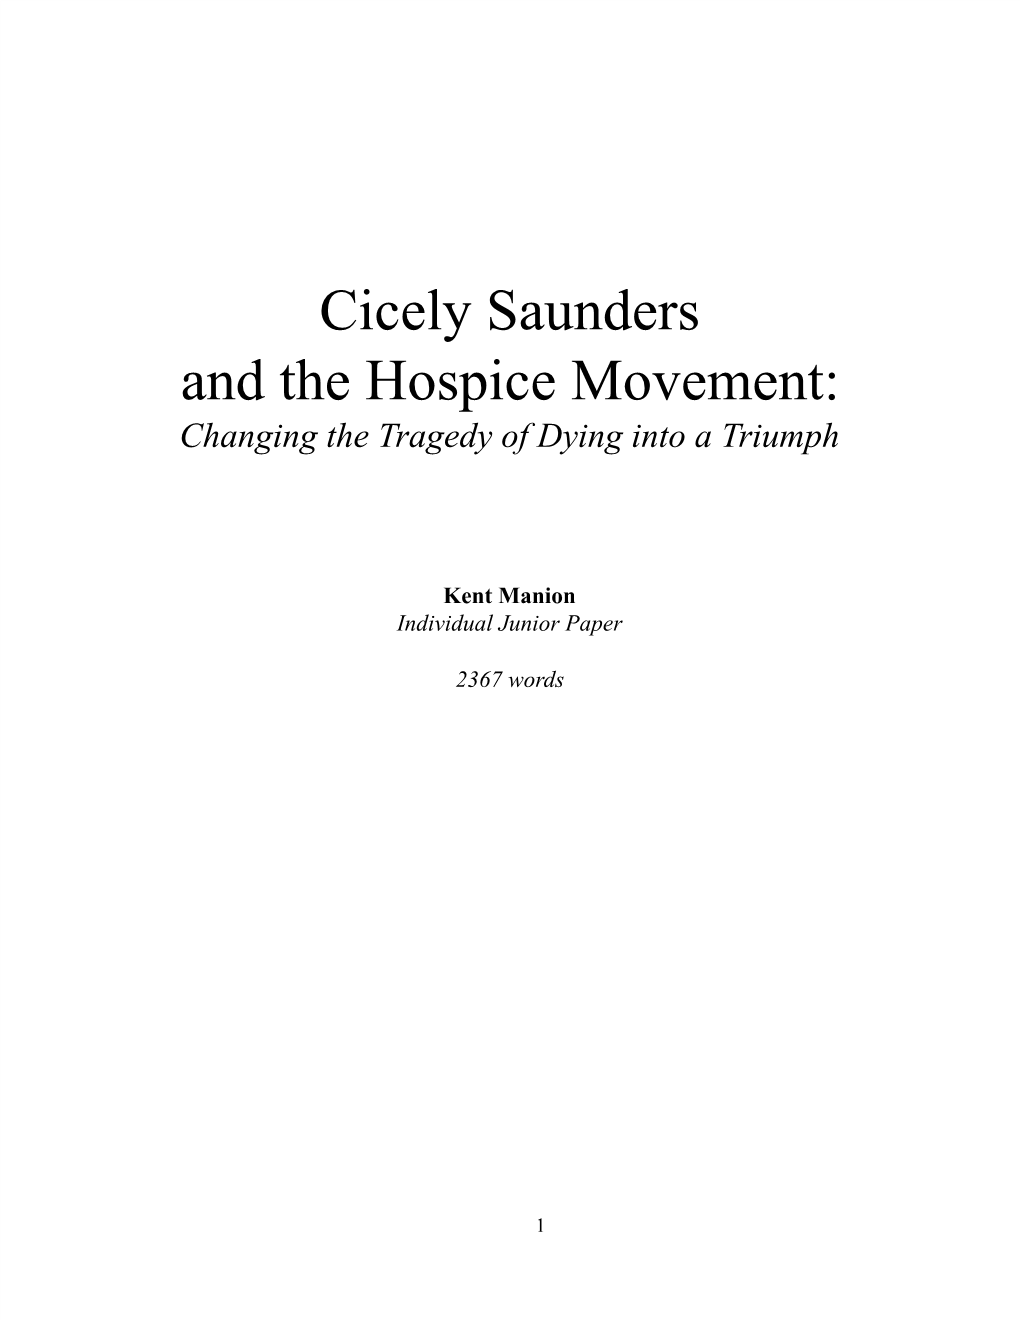 Cicely Saunders and the Hospice Movement: Changing the Tragedy of Dying Into a Triumph